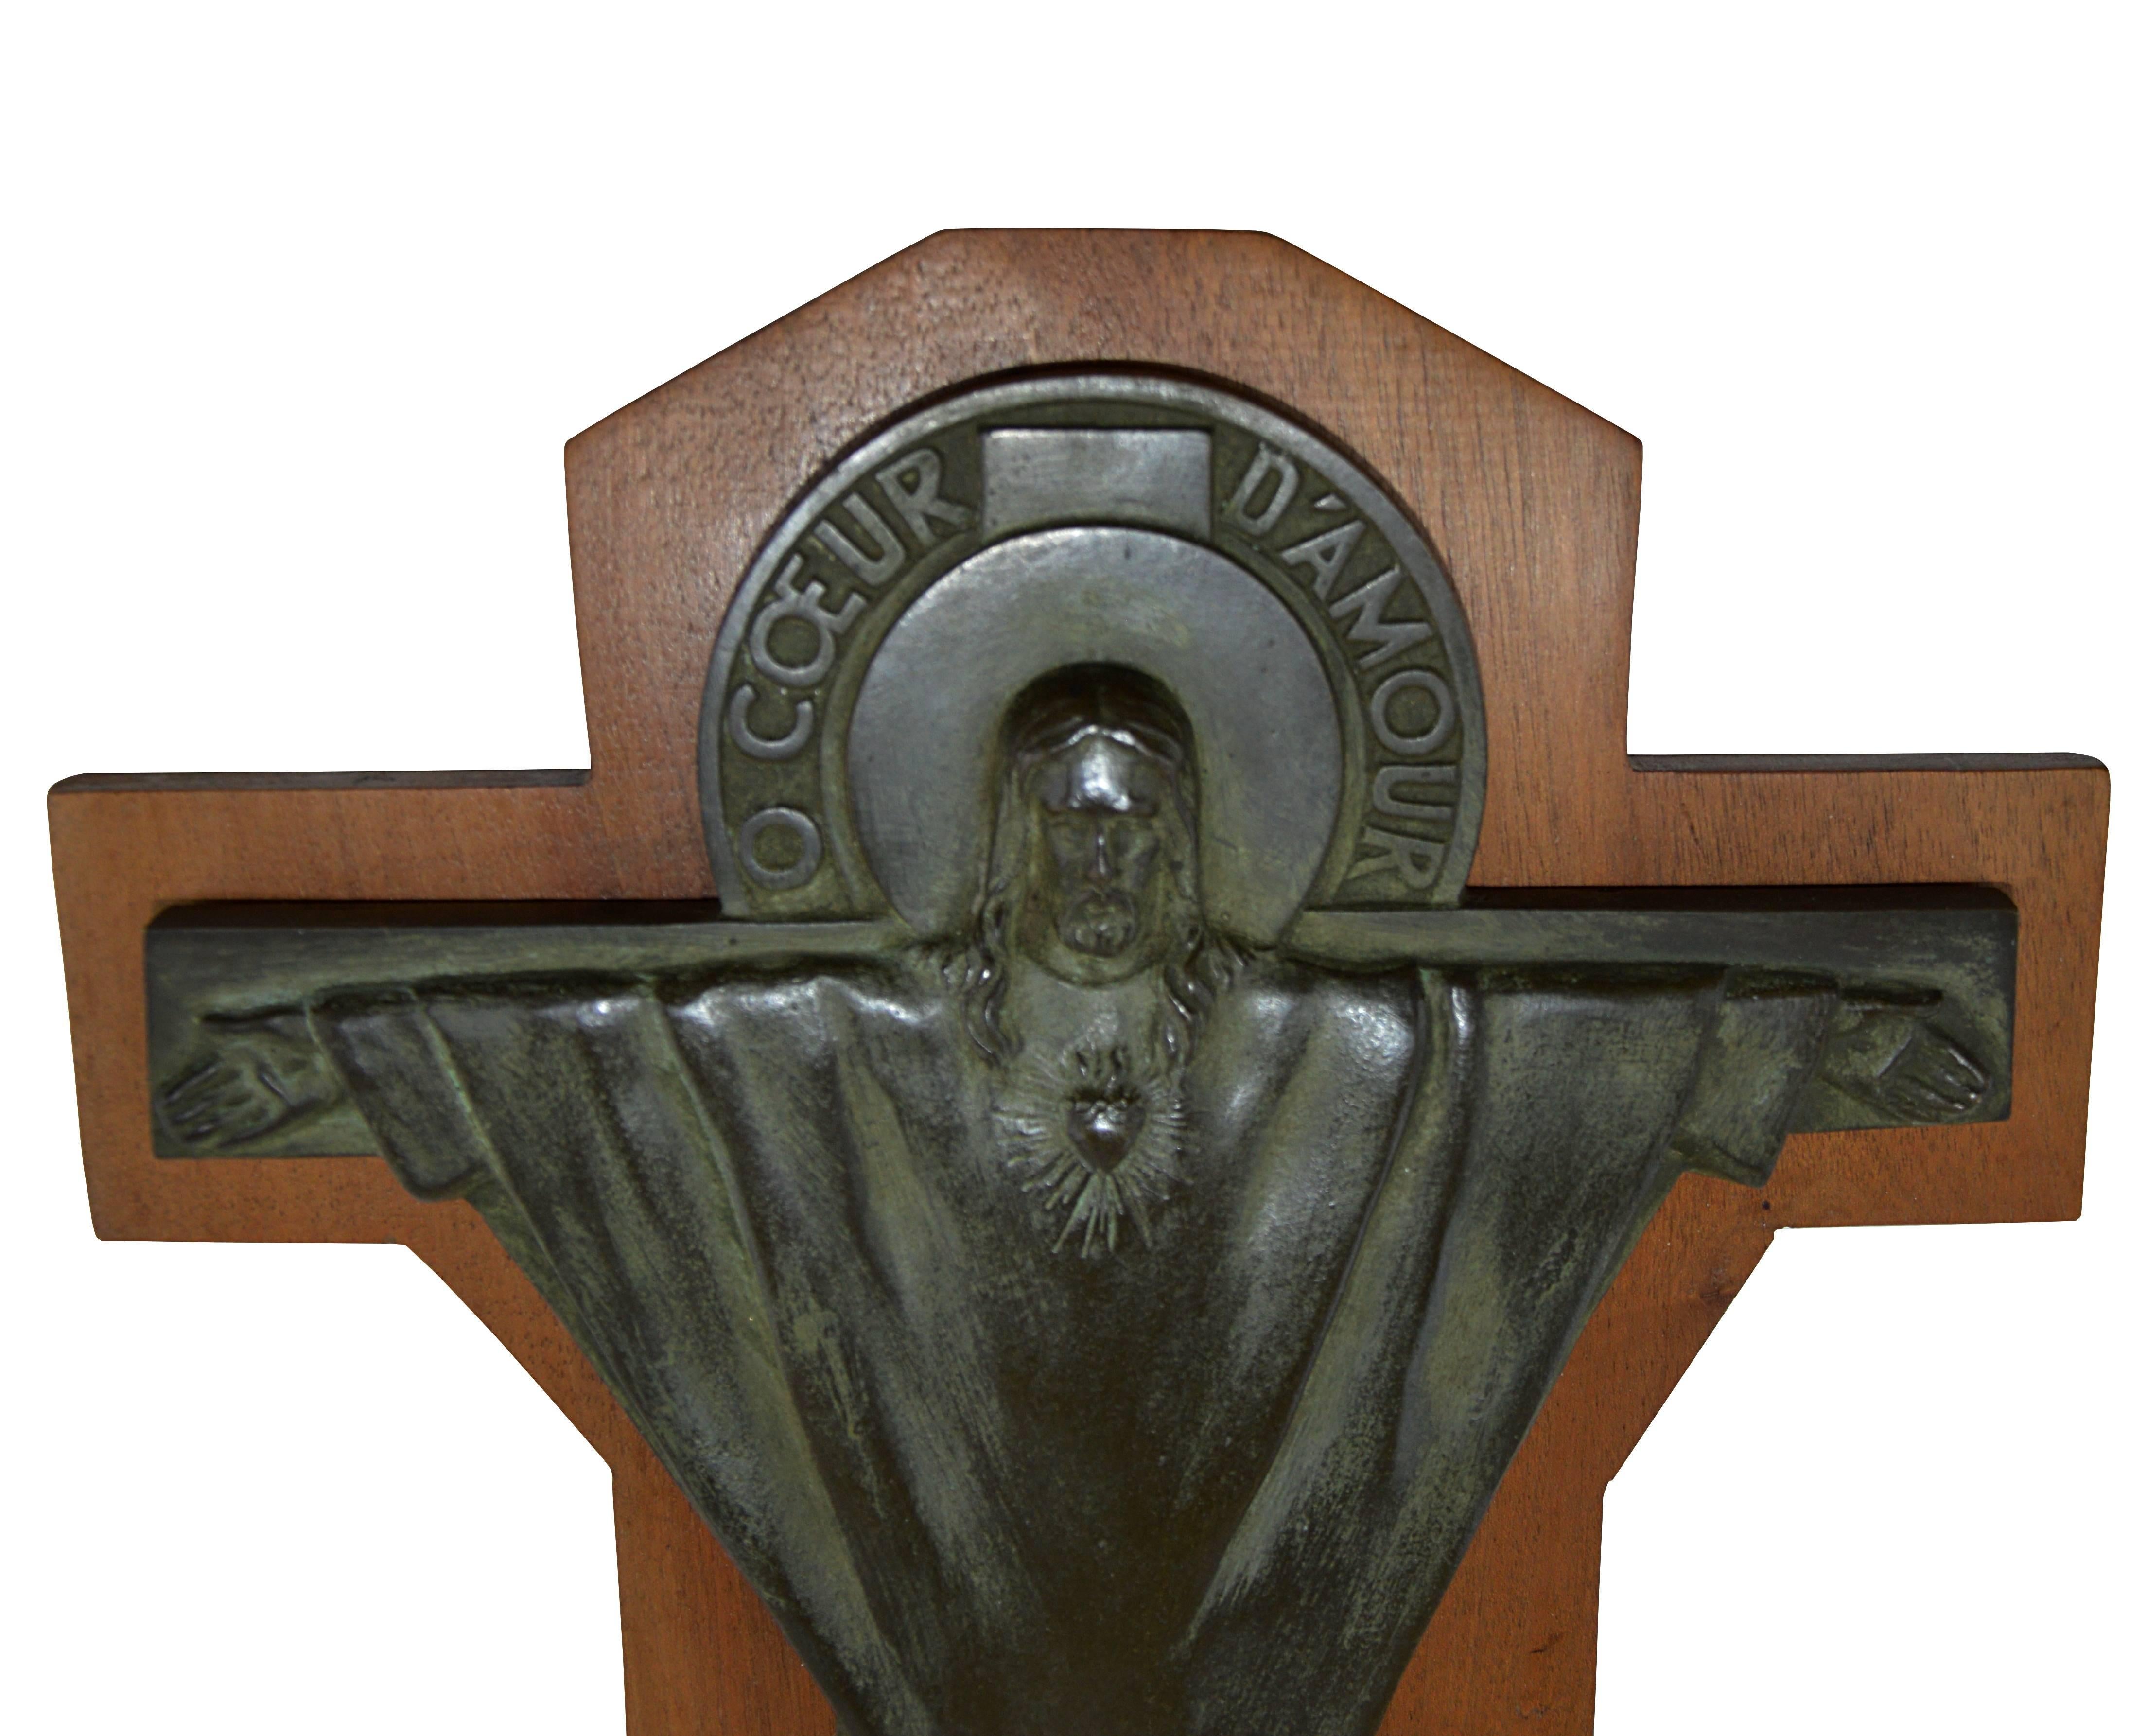 French Art Deco crucifix by Jeanne Ferrer, France, circa 1930. Bronze and wood. O Coeur d'Amour, Je Me Fie A Vous. Measure: Height 11.8